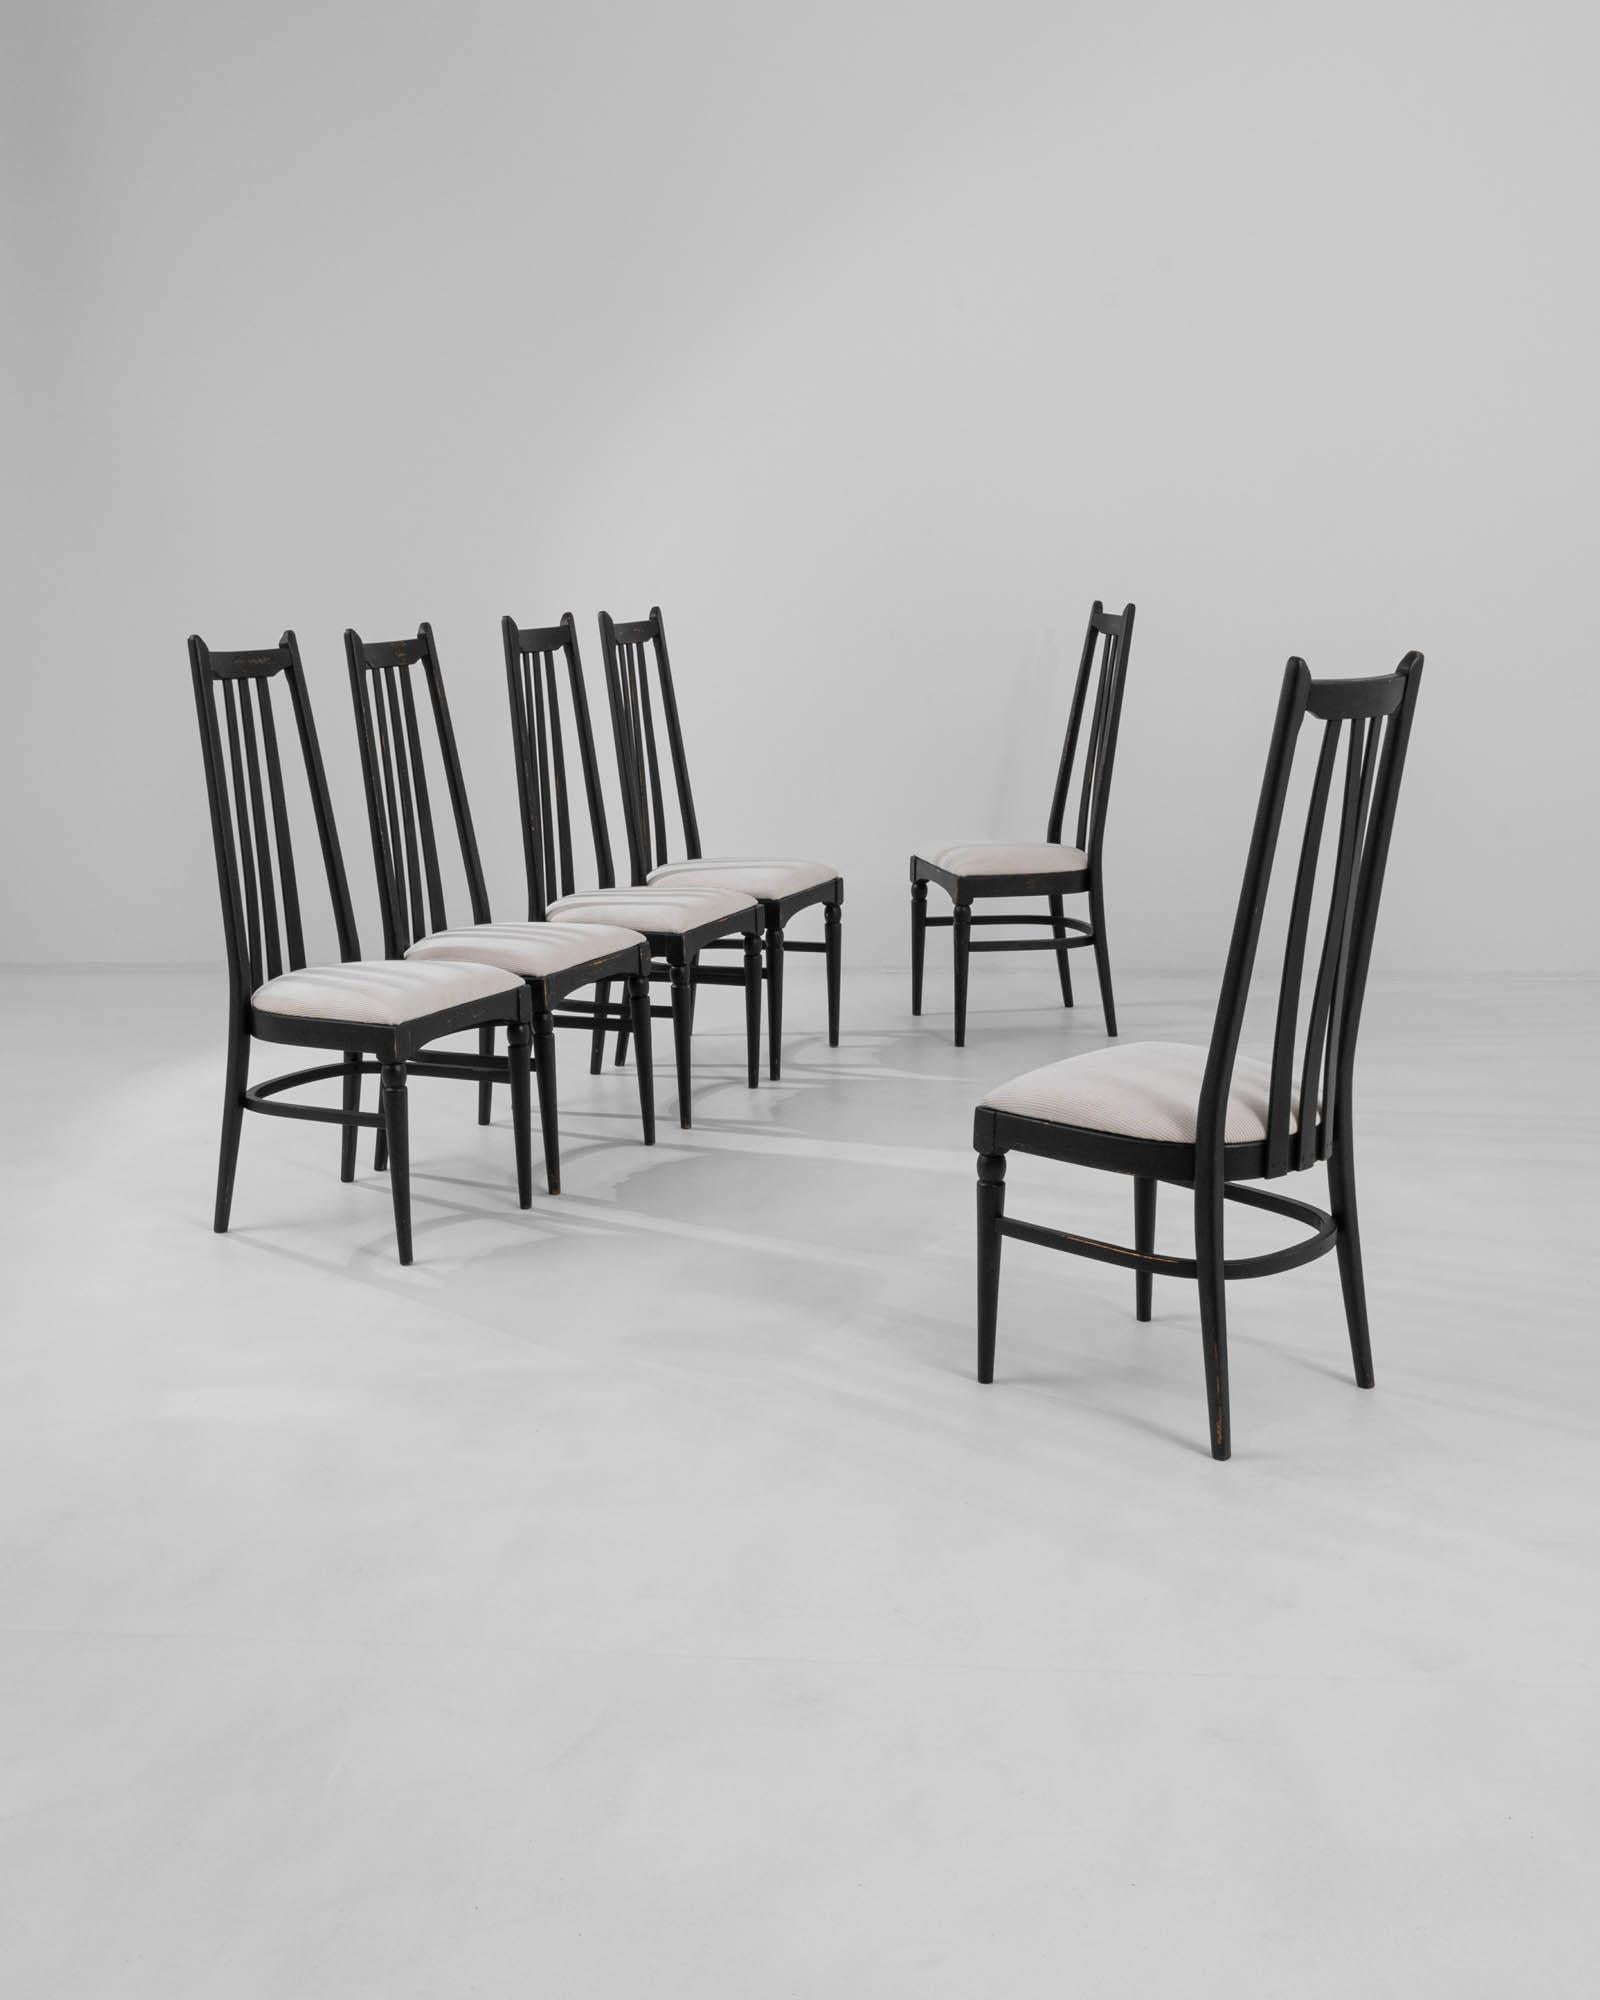 This set of six dining chairs, produced circa 1960 in Czechia, exudes a hint of gothic allure combined with mid-century modern style. The tall black backs, topped with minimalist finials resembling ears, and the sleek tapered legs, adorned with